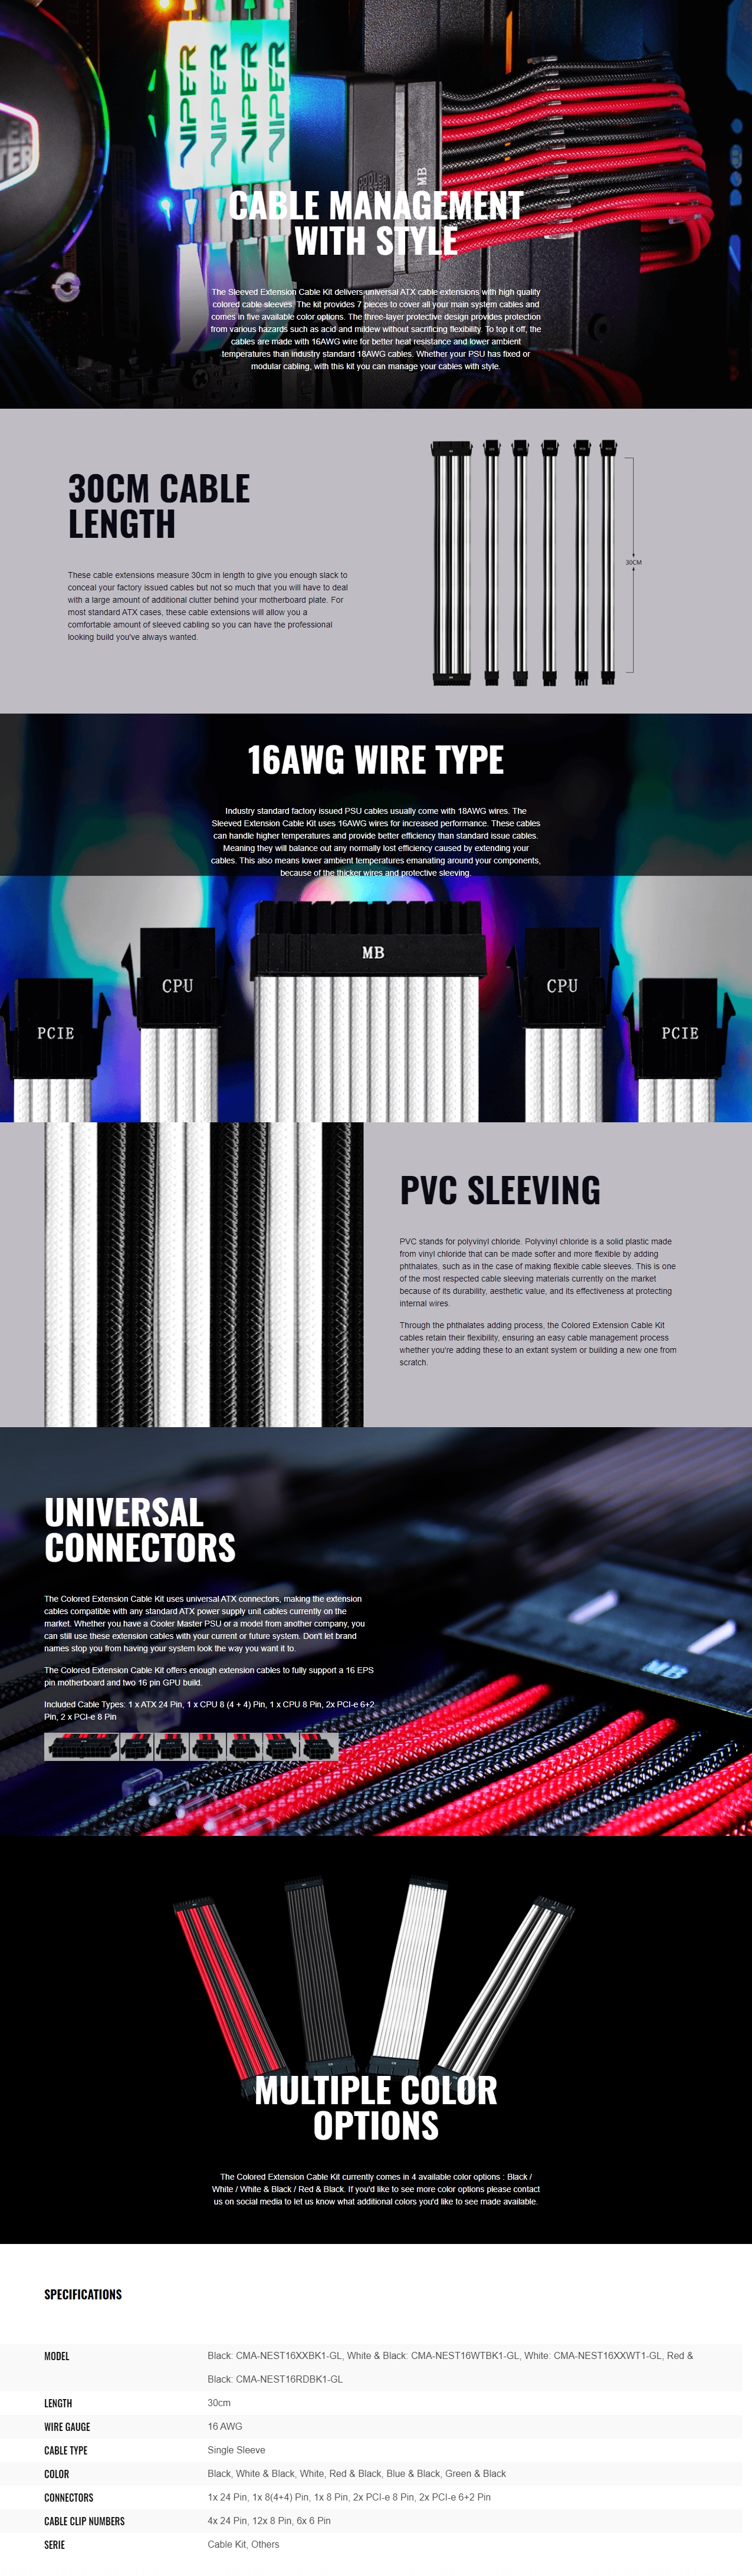 A large marketing image providing additional information about the product Cooler Master Black Sleeved ATX Extension Cable Kit - Additional alt info not provided